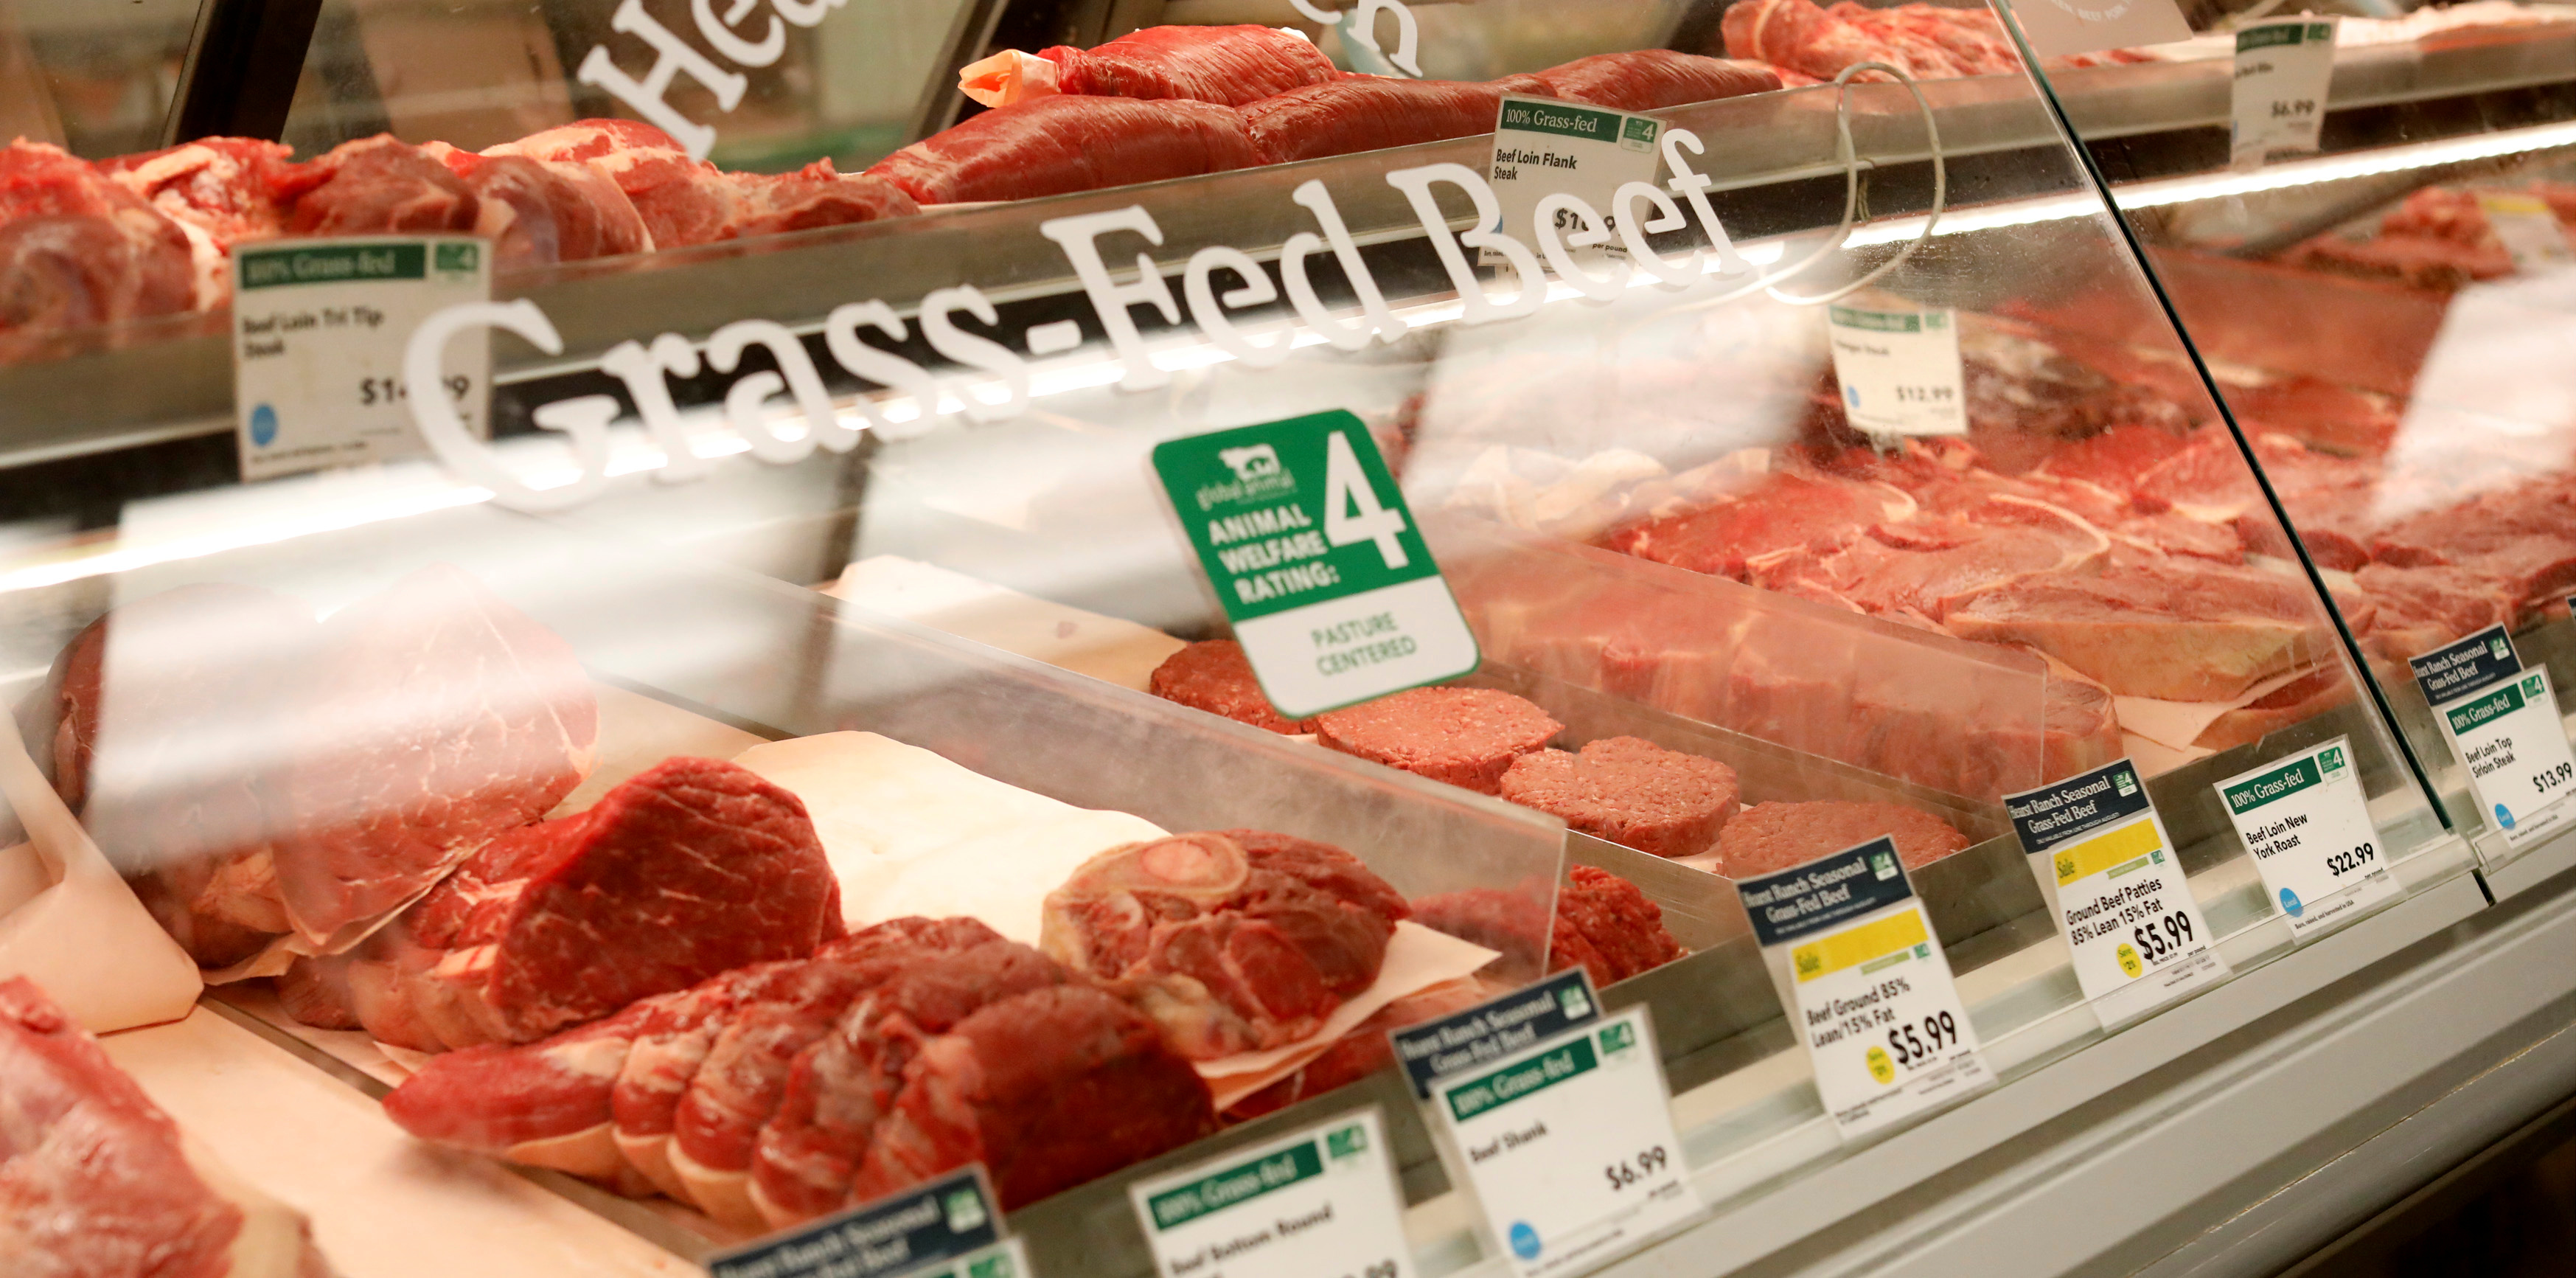 Grass-fed beef products are pictured at a Whole Foods Market in Pasadena